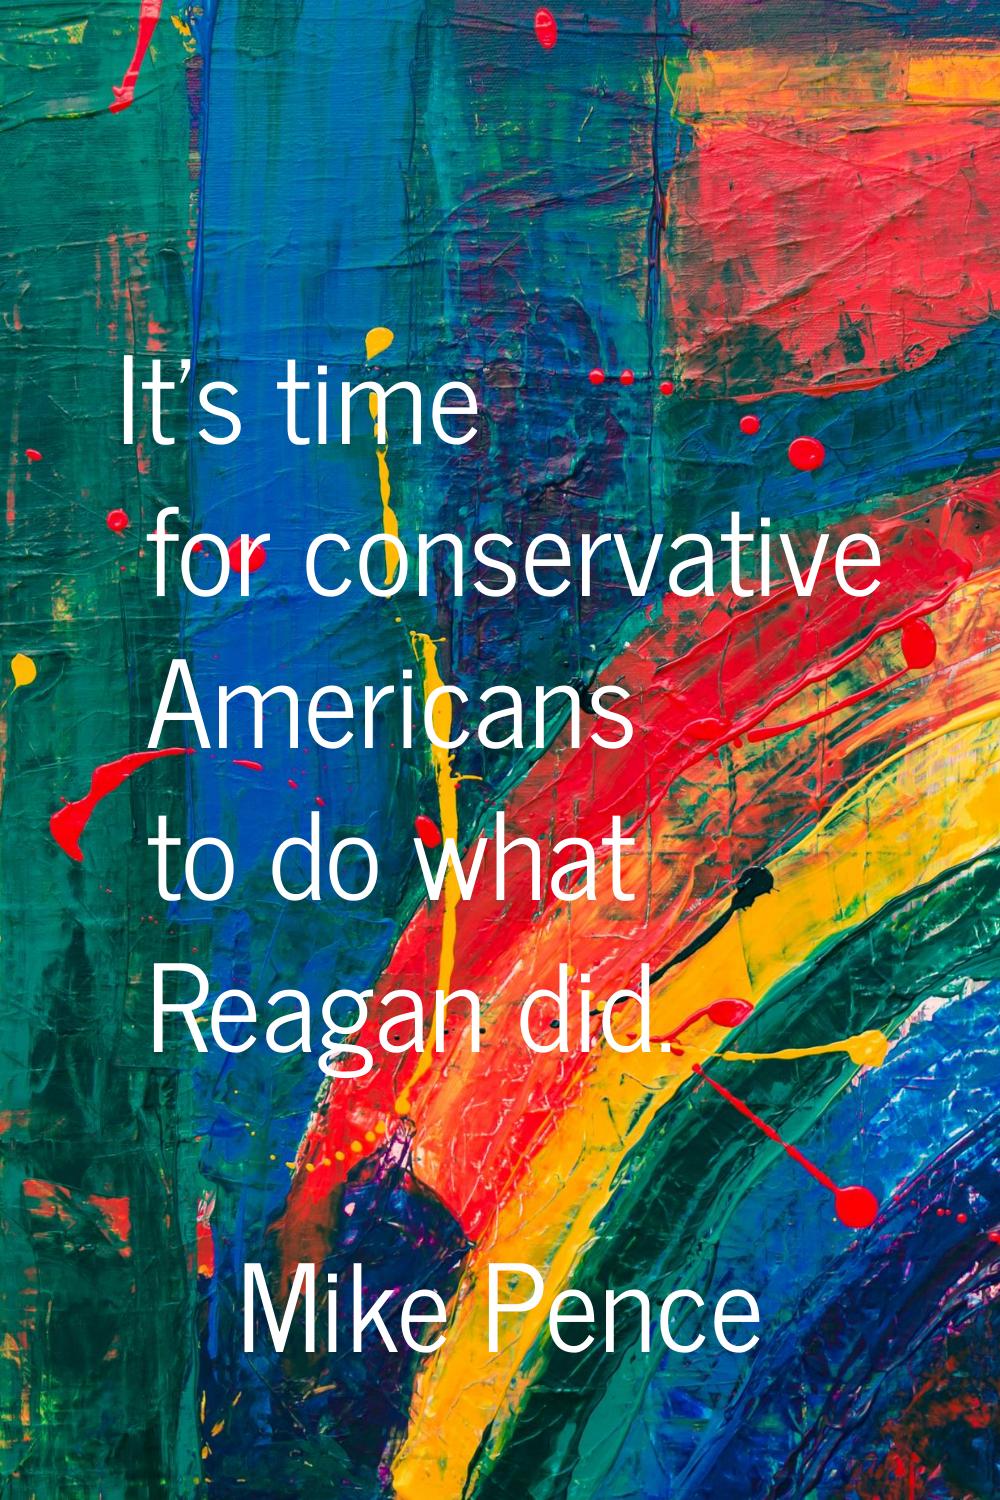 It's time for conservative Americans to do what Reagan did.